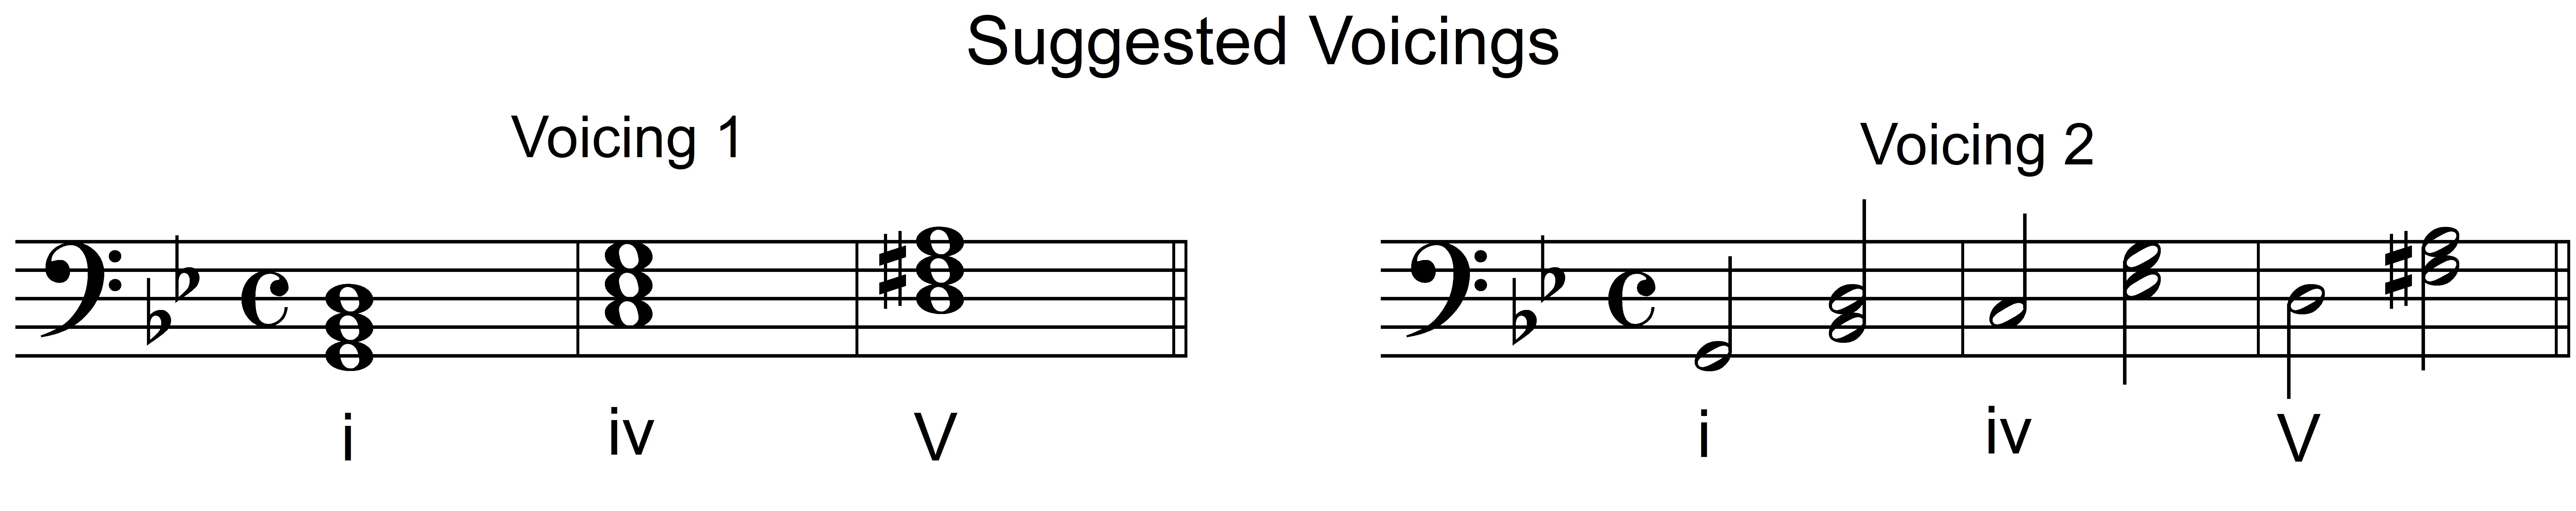 voicings for oh mary don't you weep